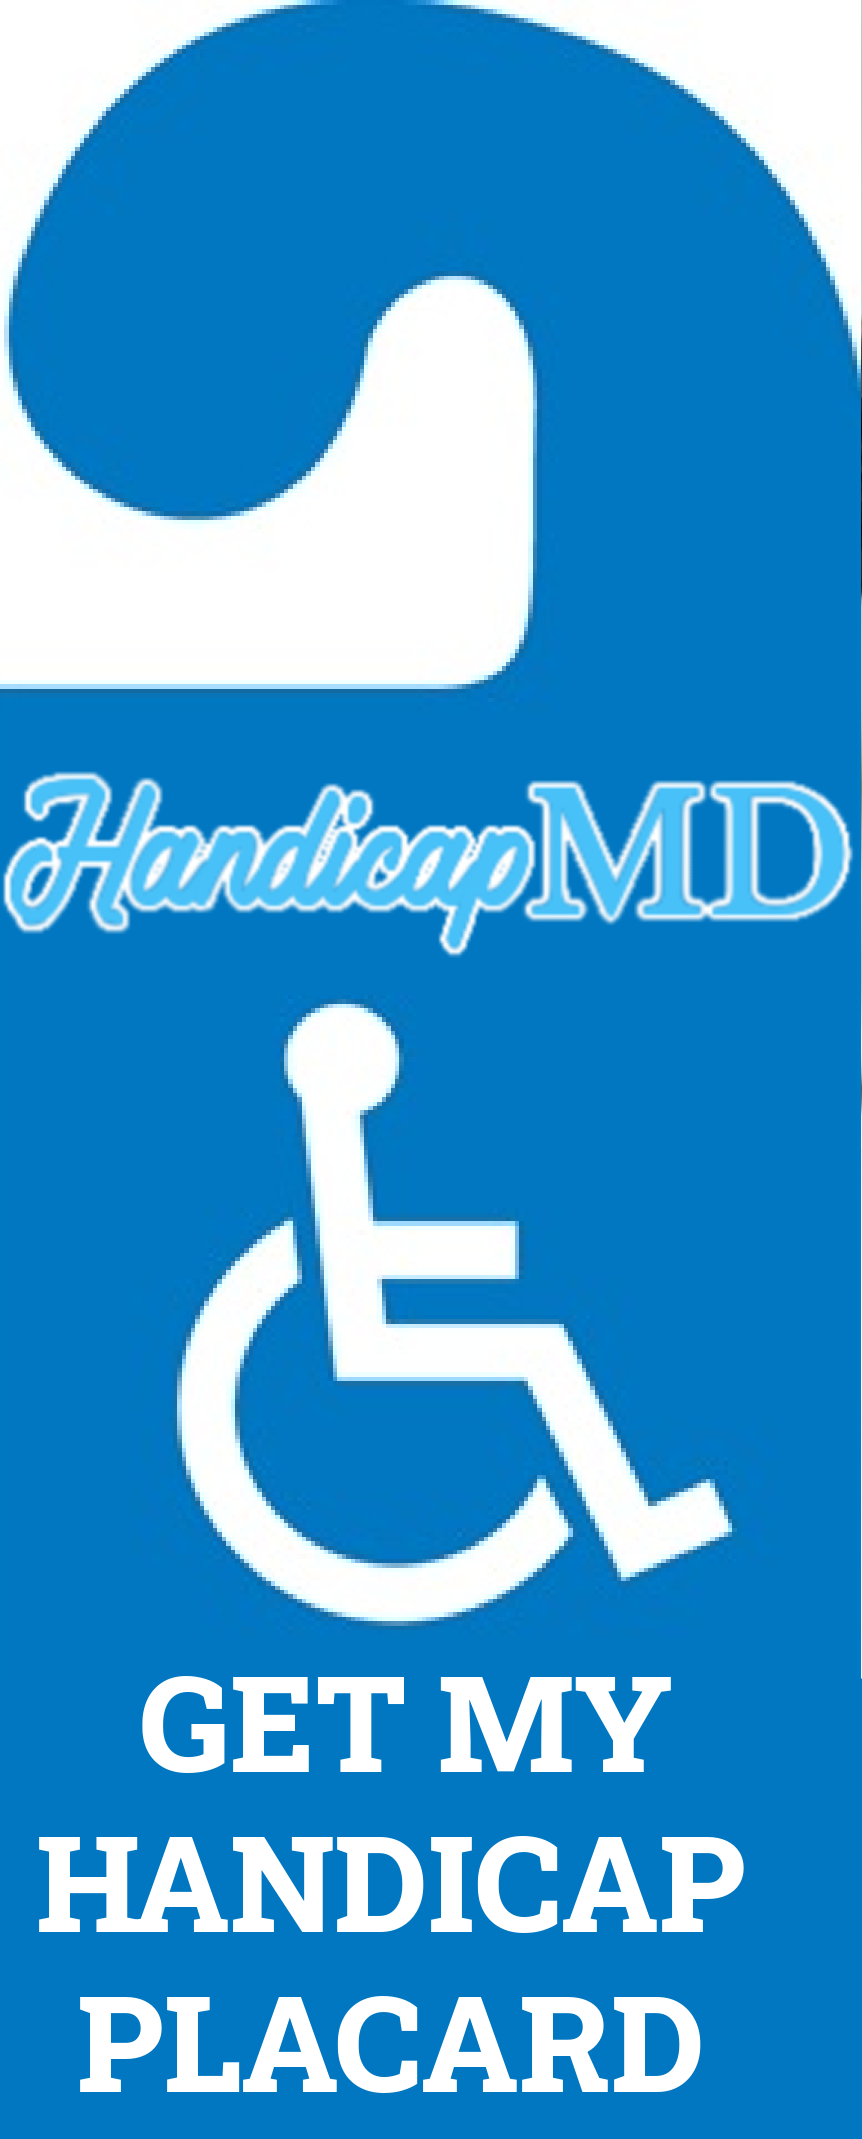 Tips for Displaying Your Handicap Placard Correctly in Michigan